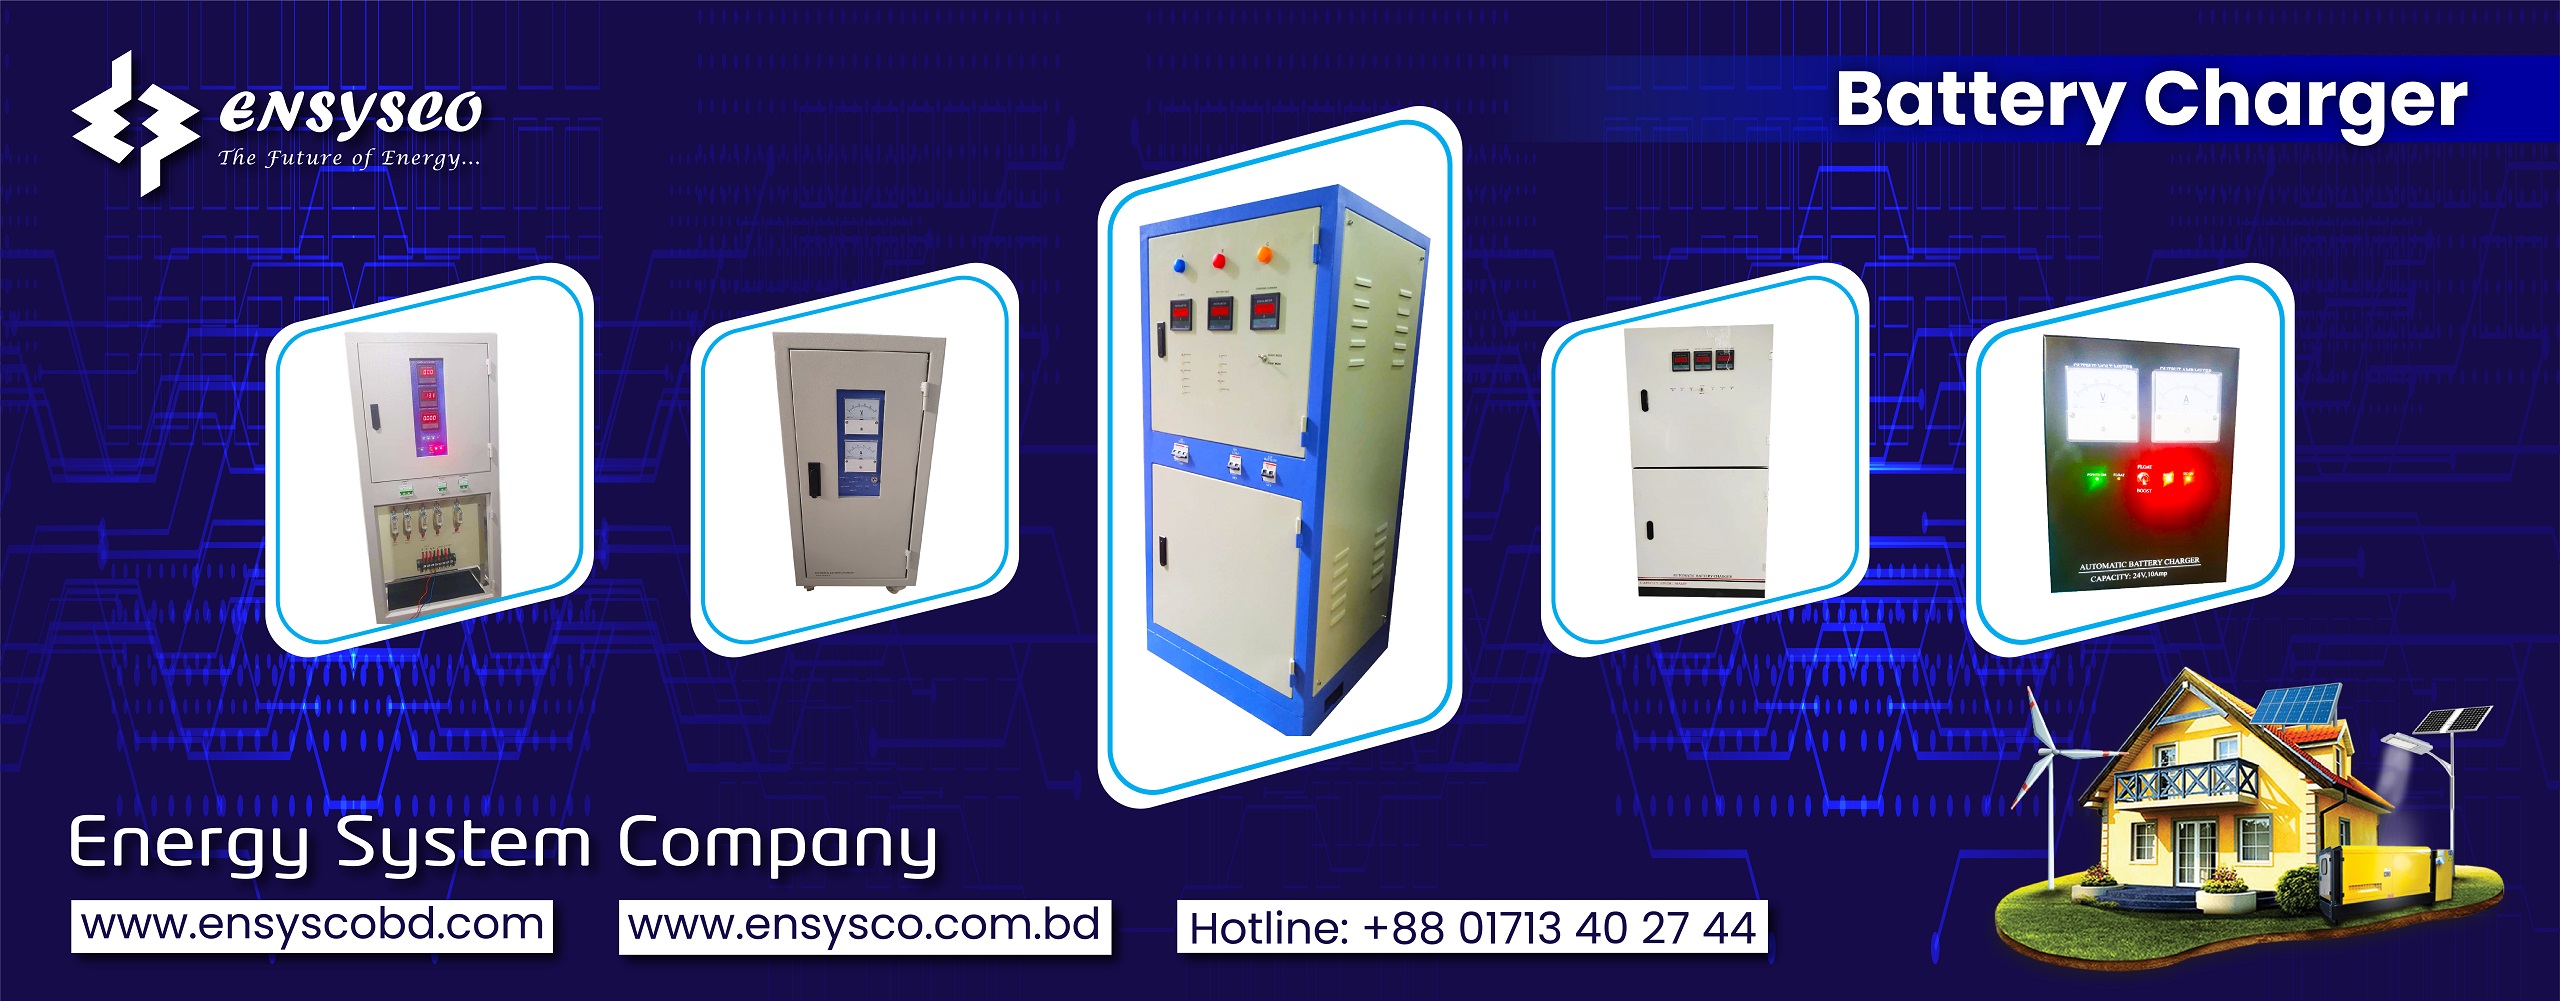 Industrial Battery Charger Price in Bangladesh